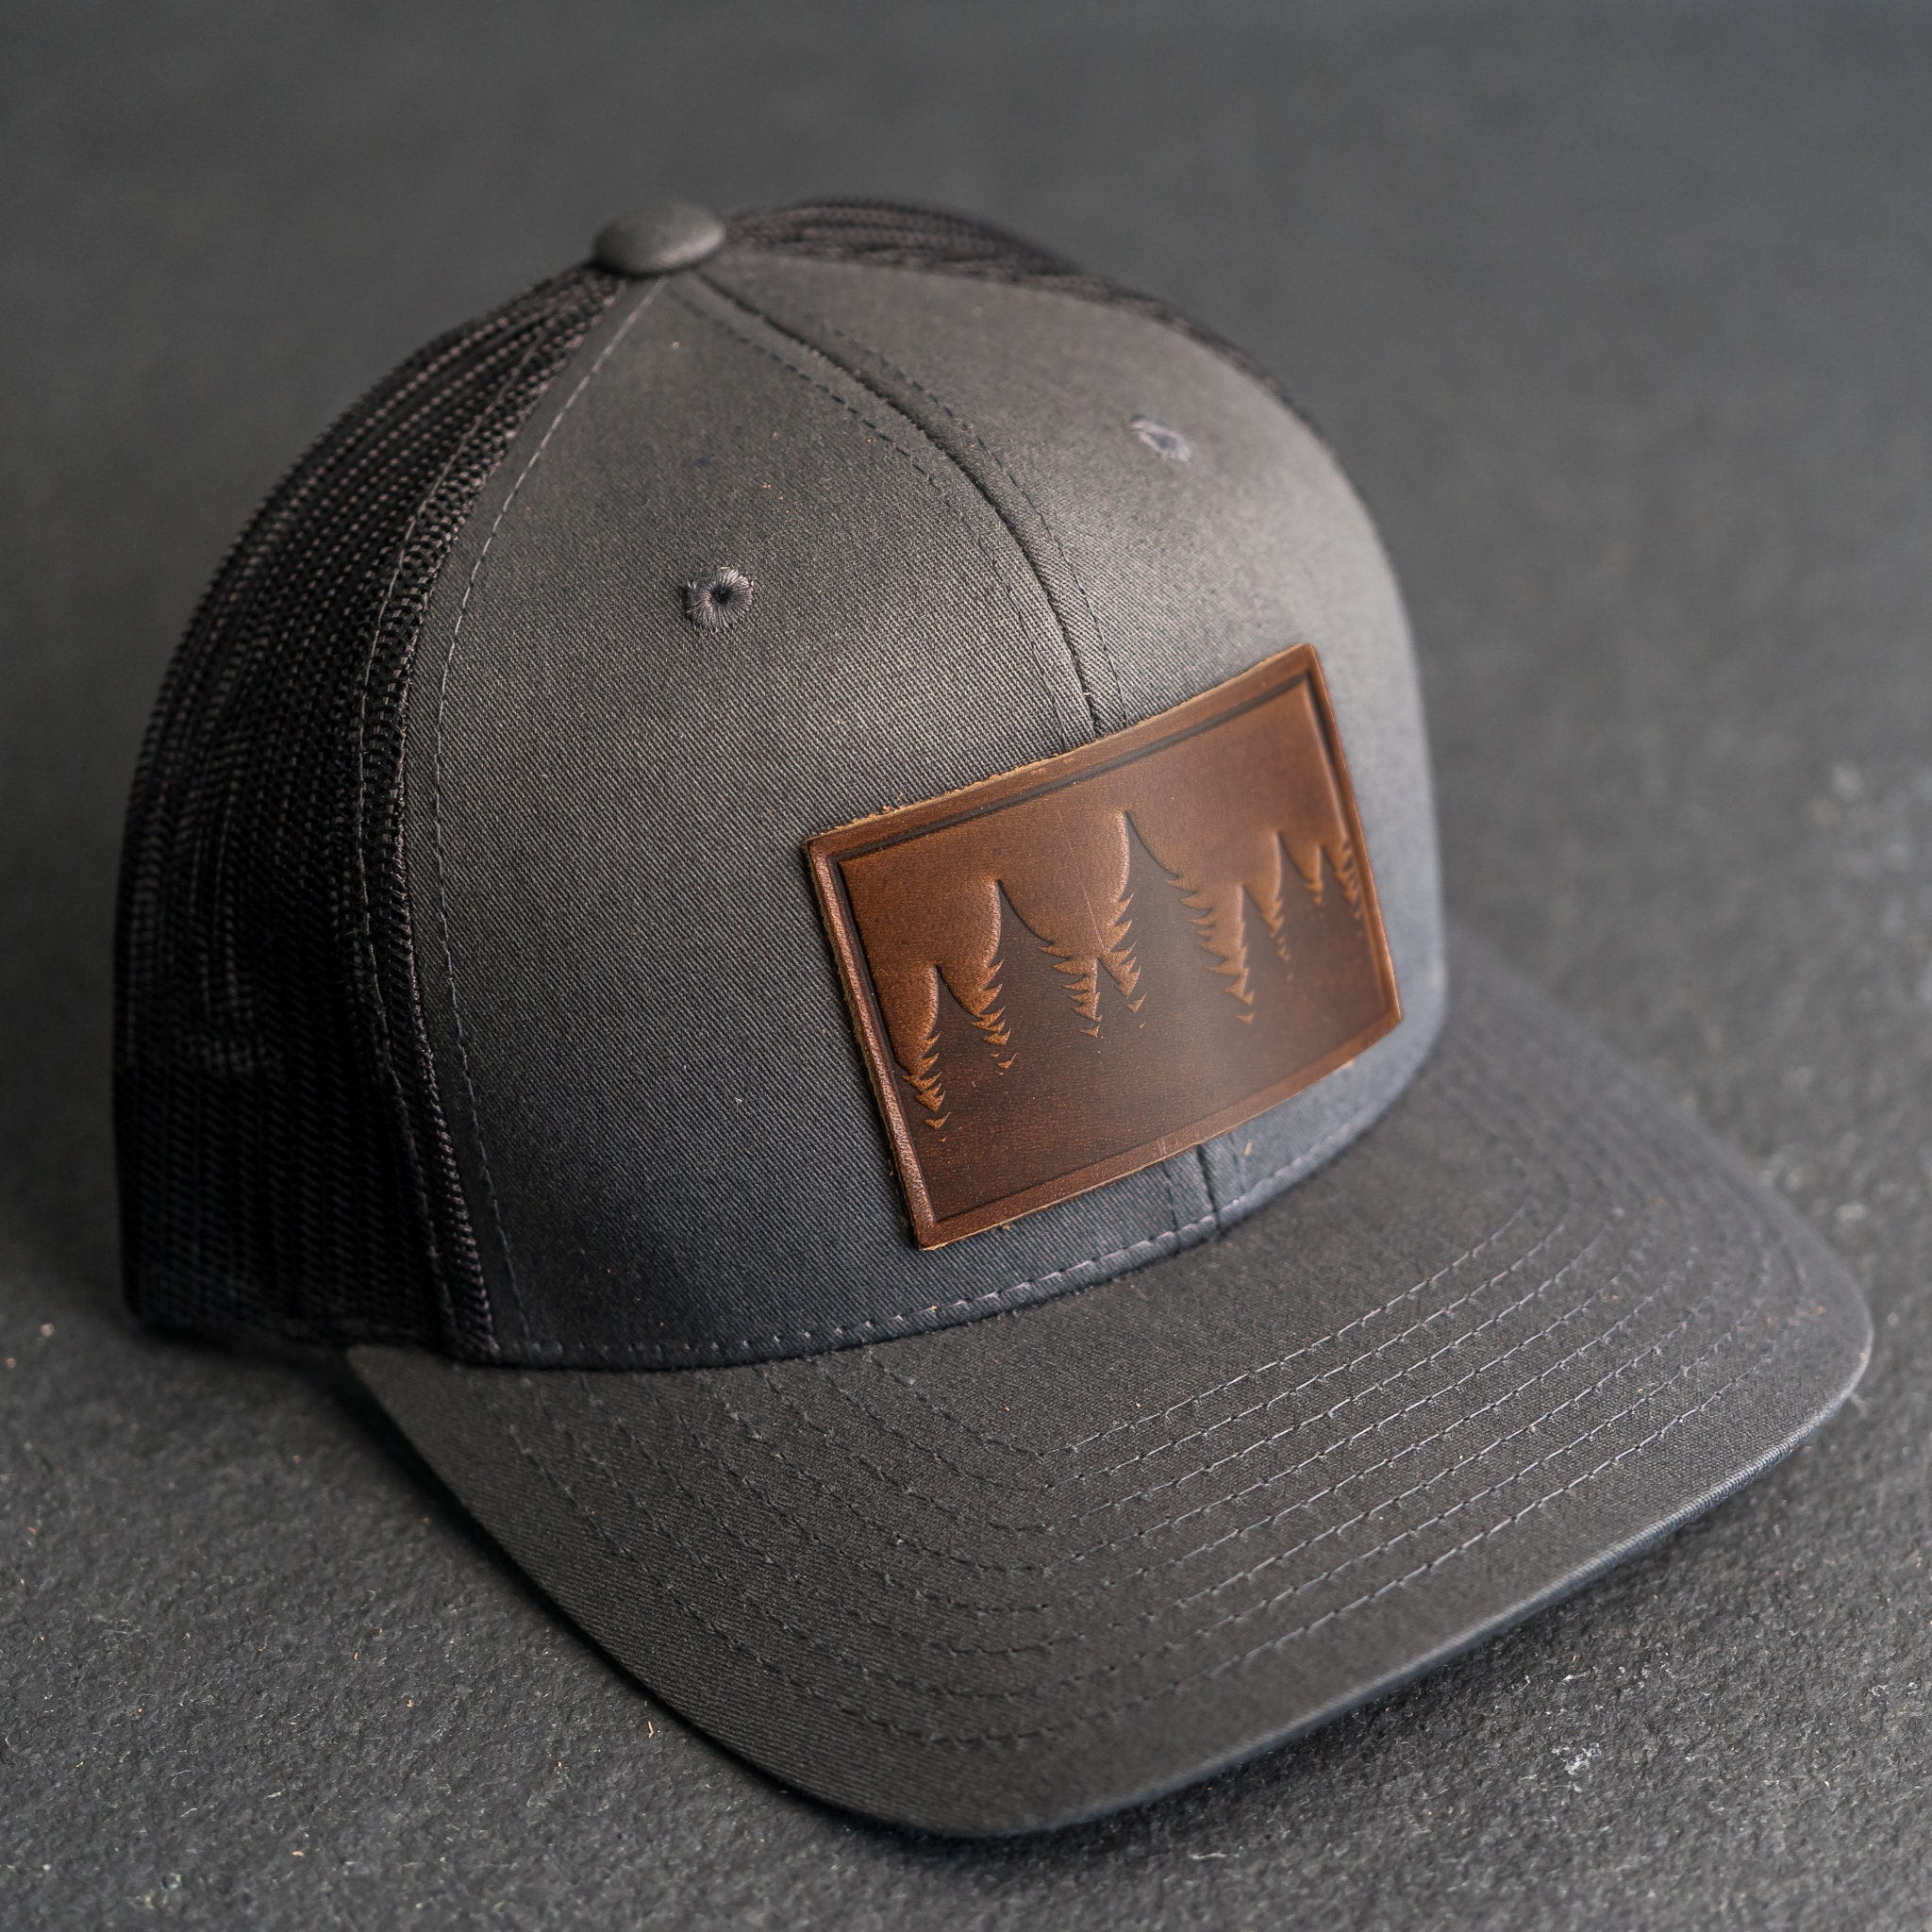 Pine Tree Ridgeline Hat Leather Patch Trucker Style Hats Mountains Hiking  Apparel Accessories for Him and Her Gift Ideas 